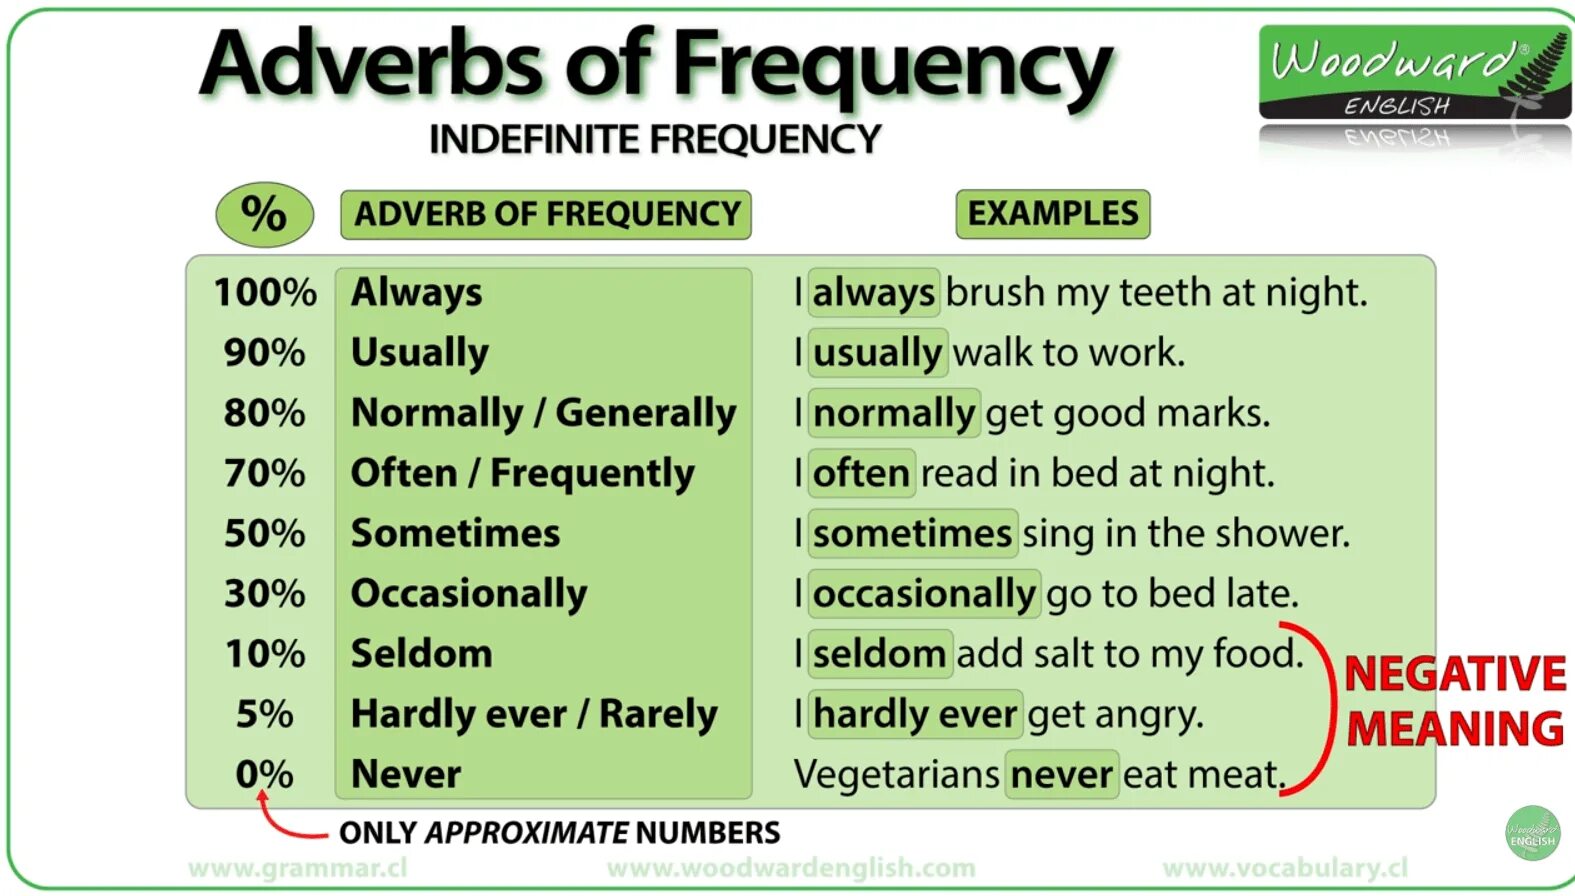 Adverbs of Frequency. Adverbs of Frequency in English. Adverbs and expressions of Frequency правило. Frequency adverbs грамматика.